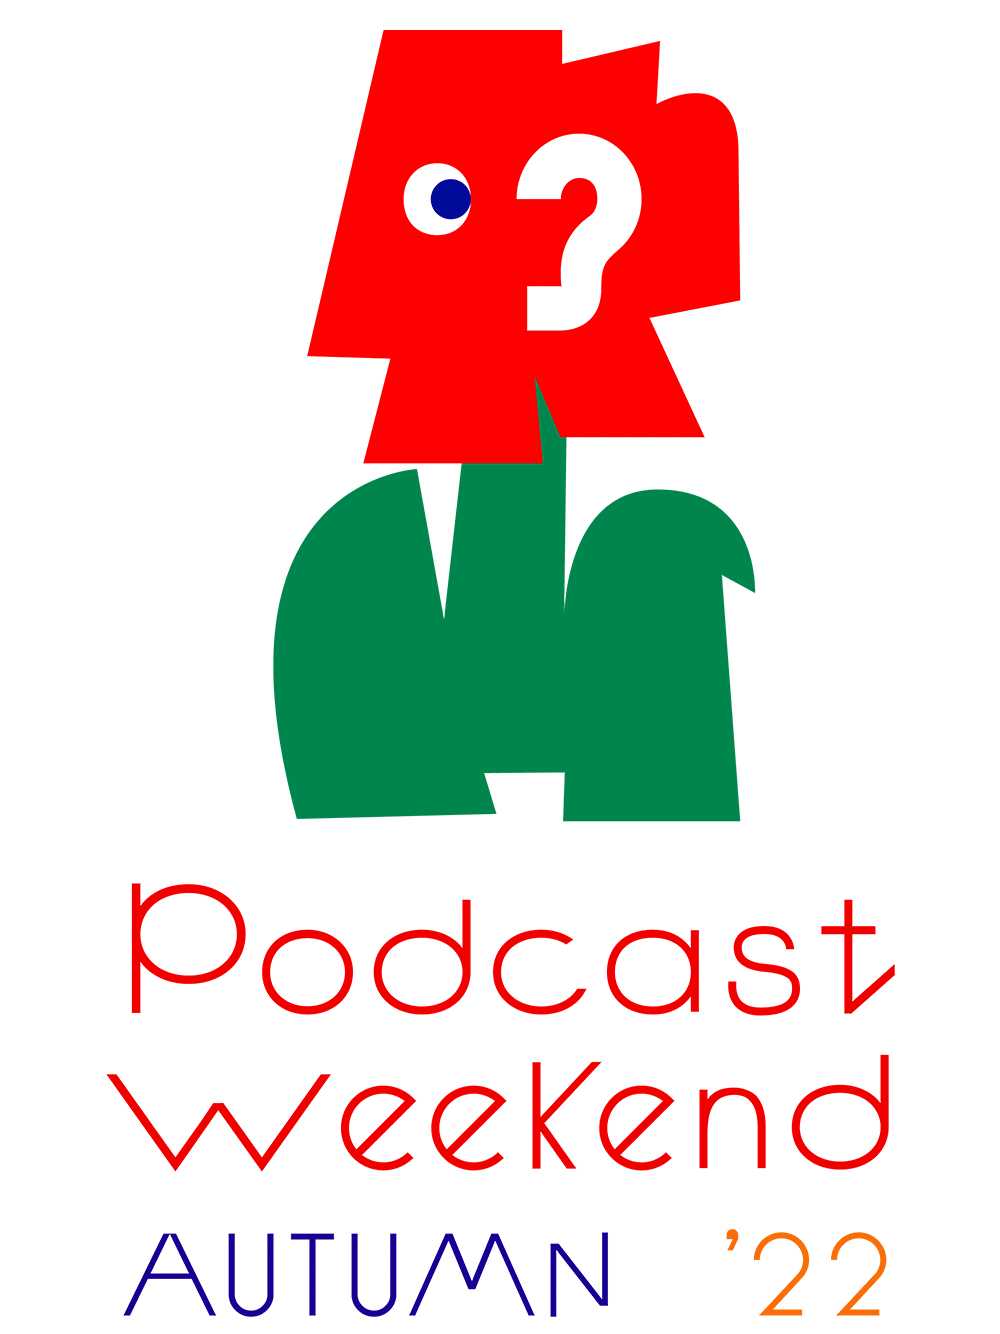 Podcast Weekend